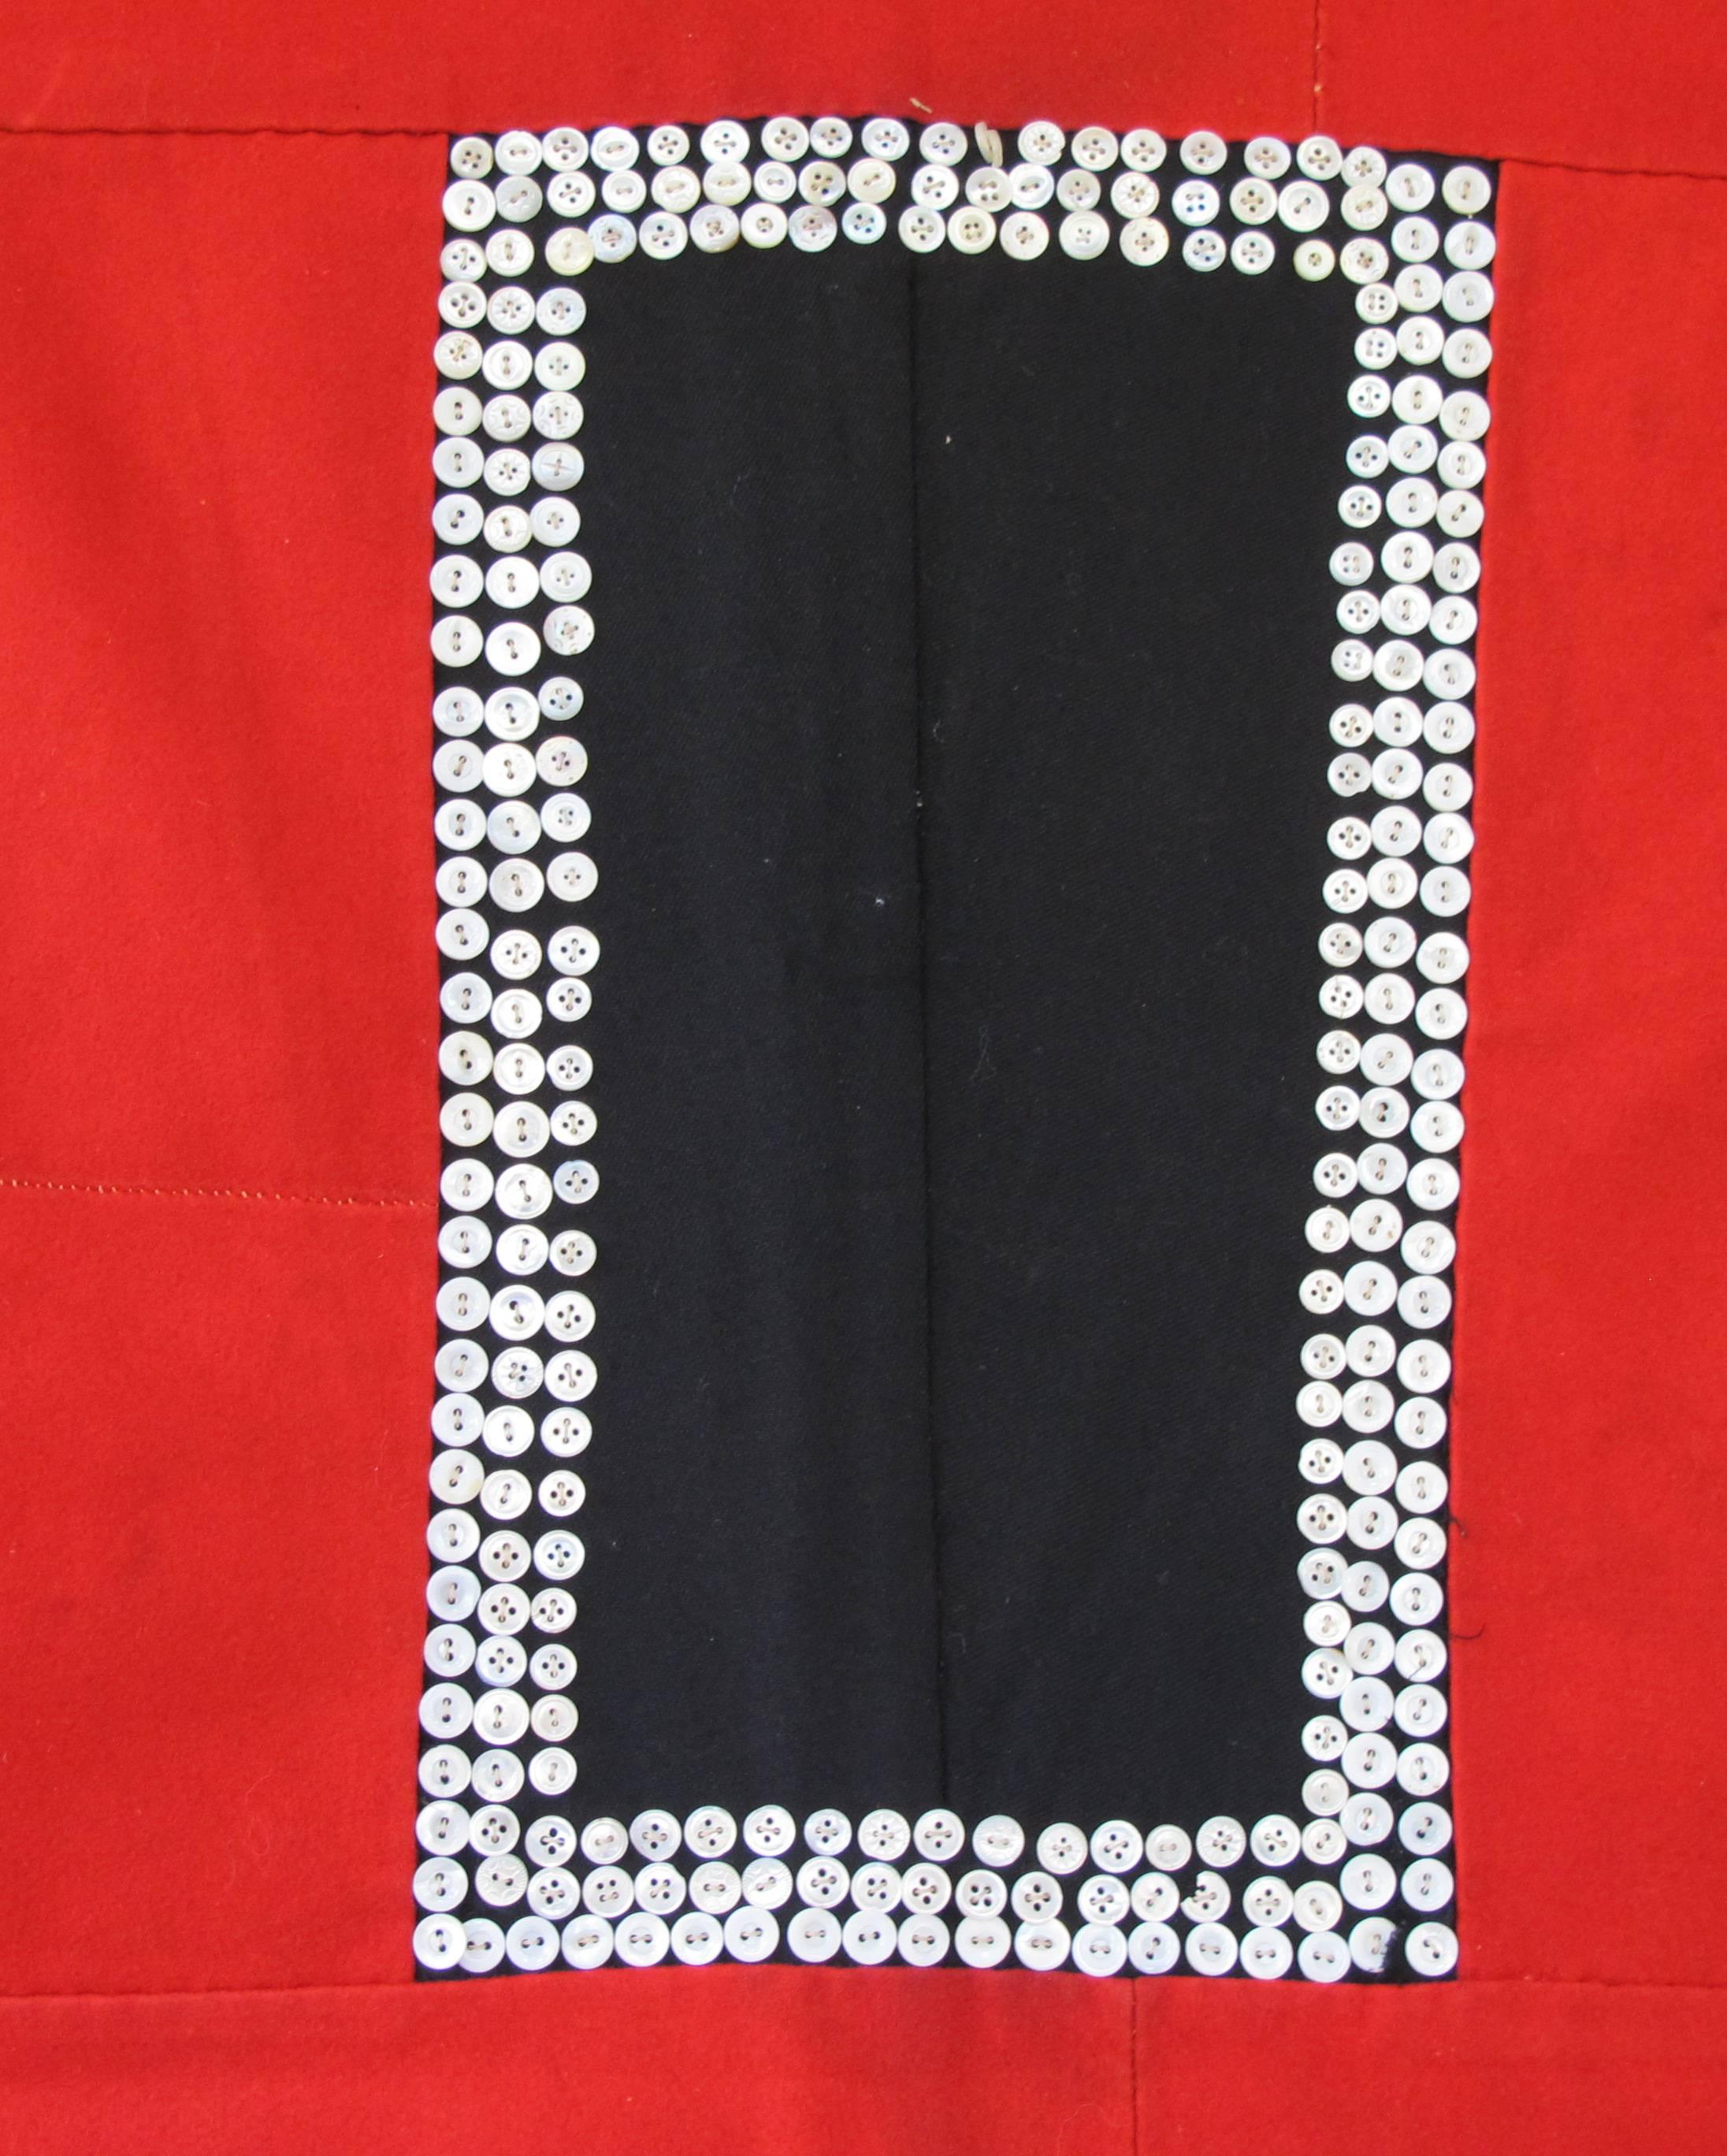 There was a tradition among the Tlingit people of the Northwest Coast for the women to make button blankets. Utilizing the wool blankets that they acquired through trade they made blankets with effigy clan images or as in this example bold geometric